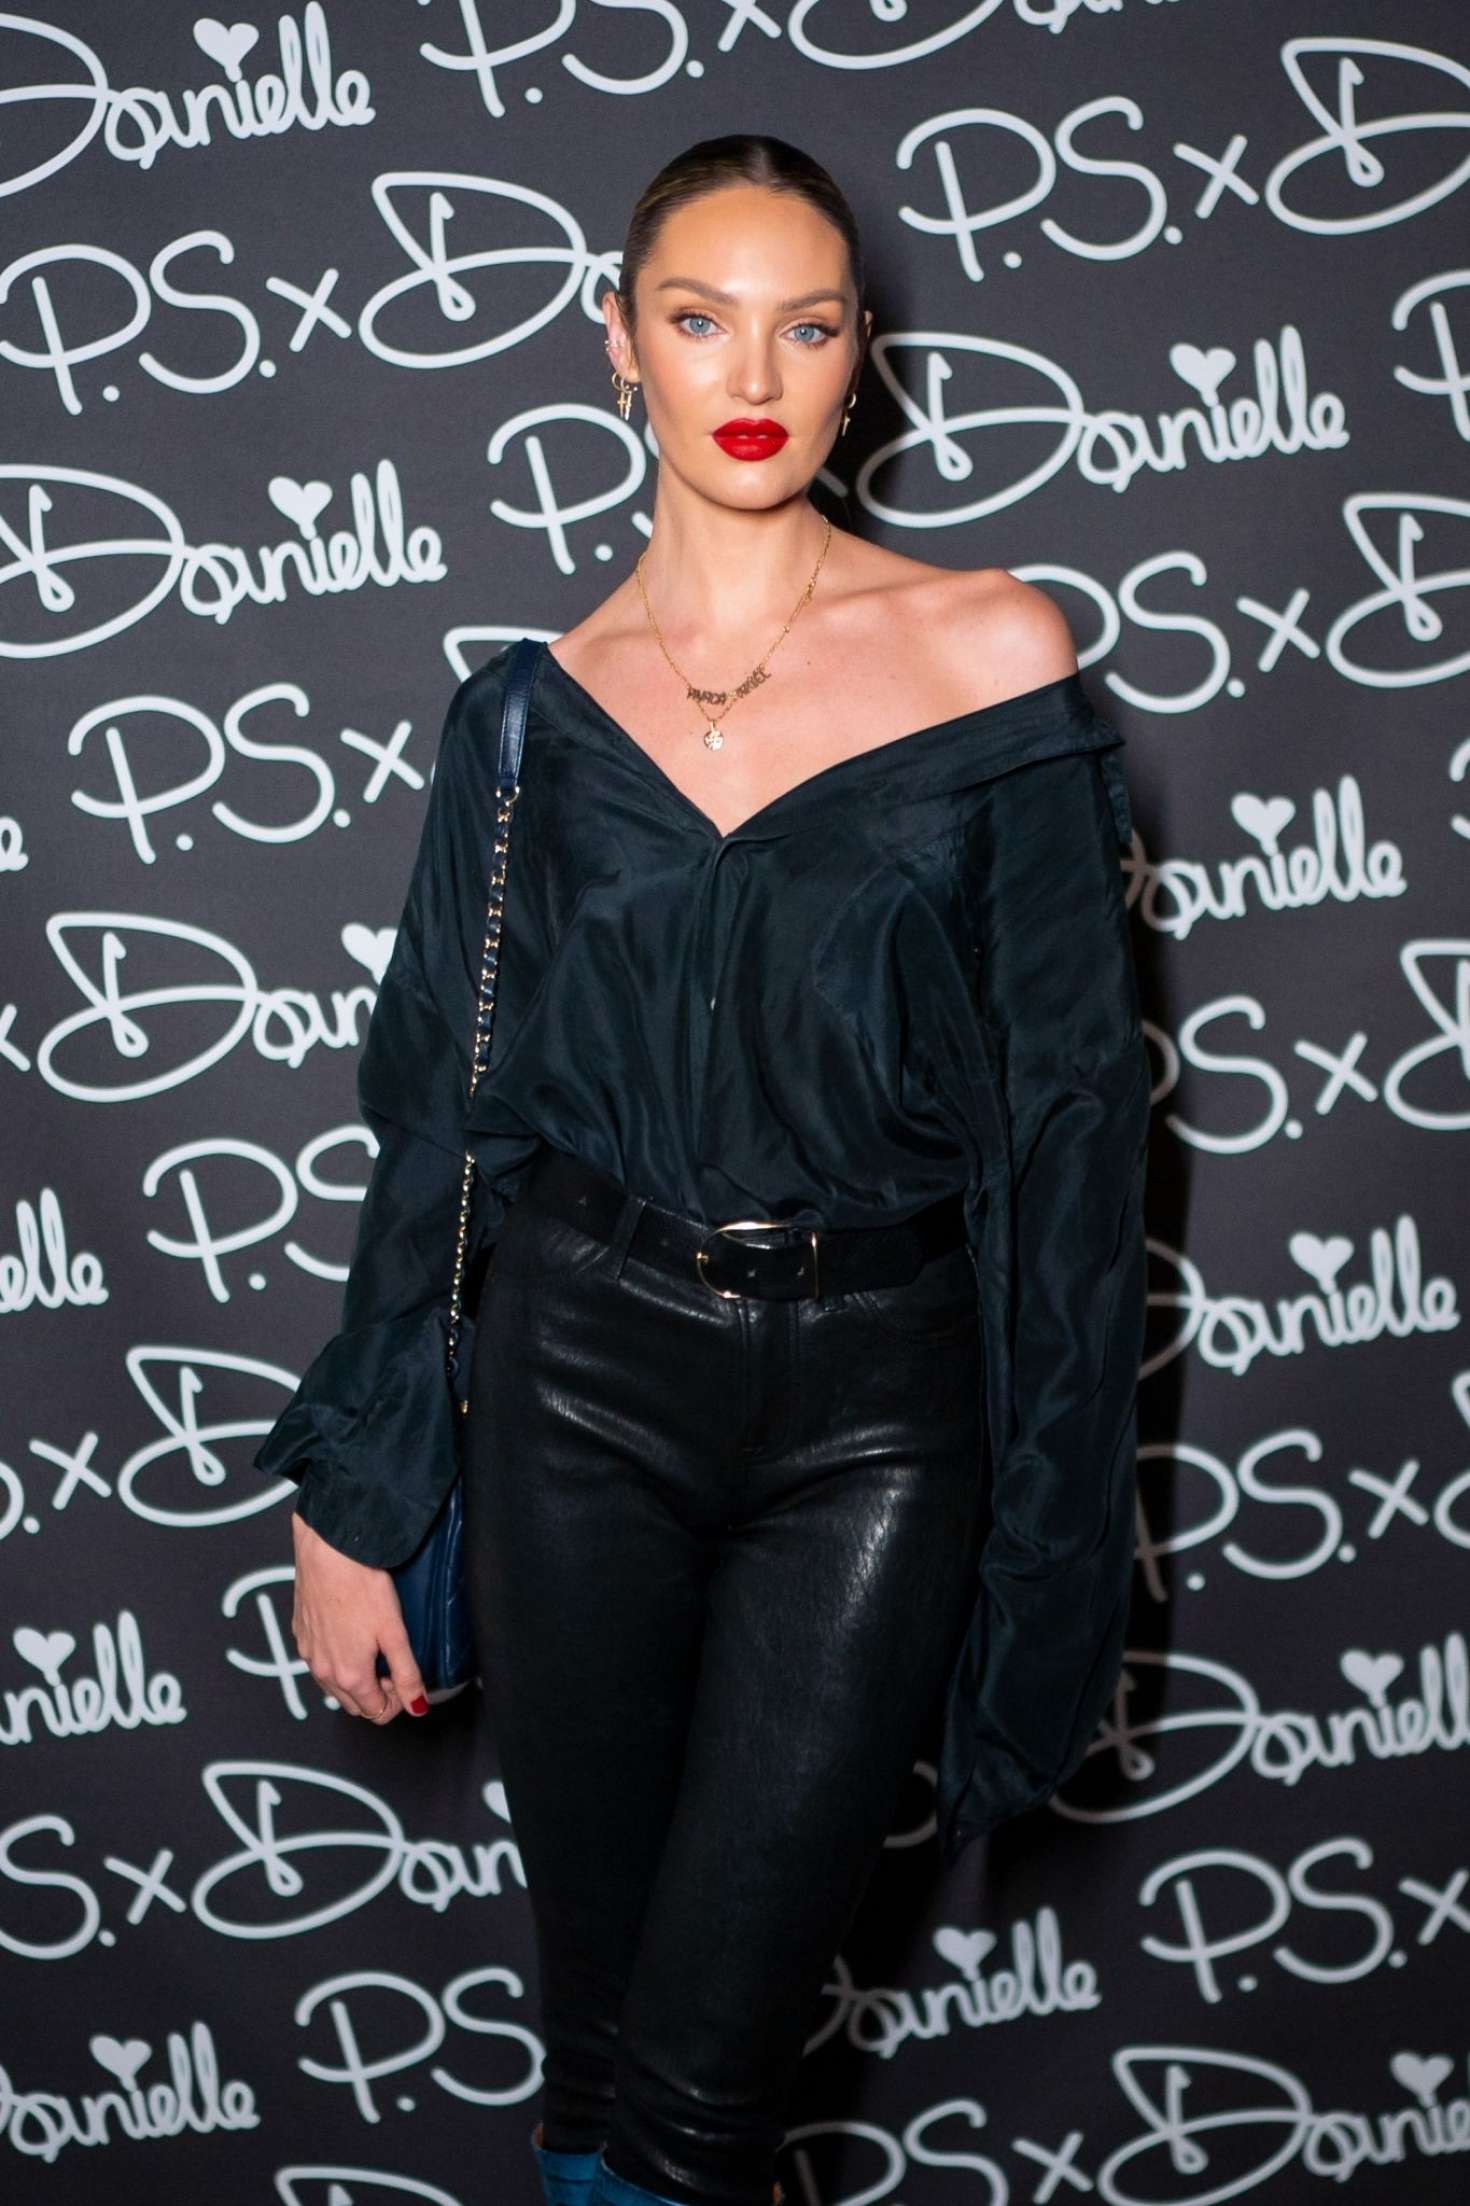 Candice Swanepoel â€“ P.S. x Danielle Launch by Danielle Priano in NYC